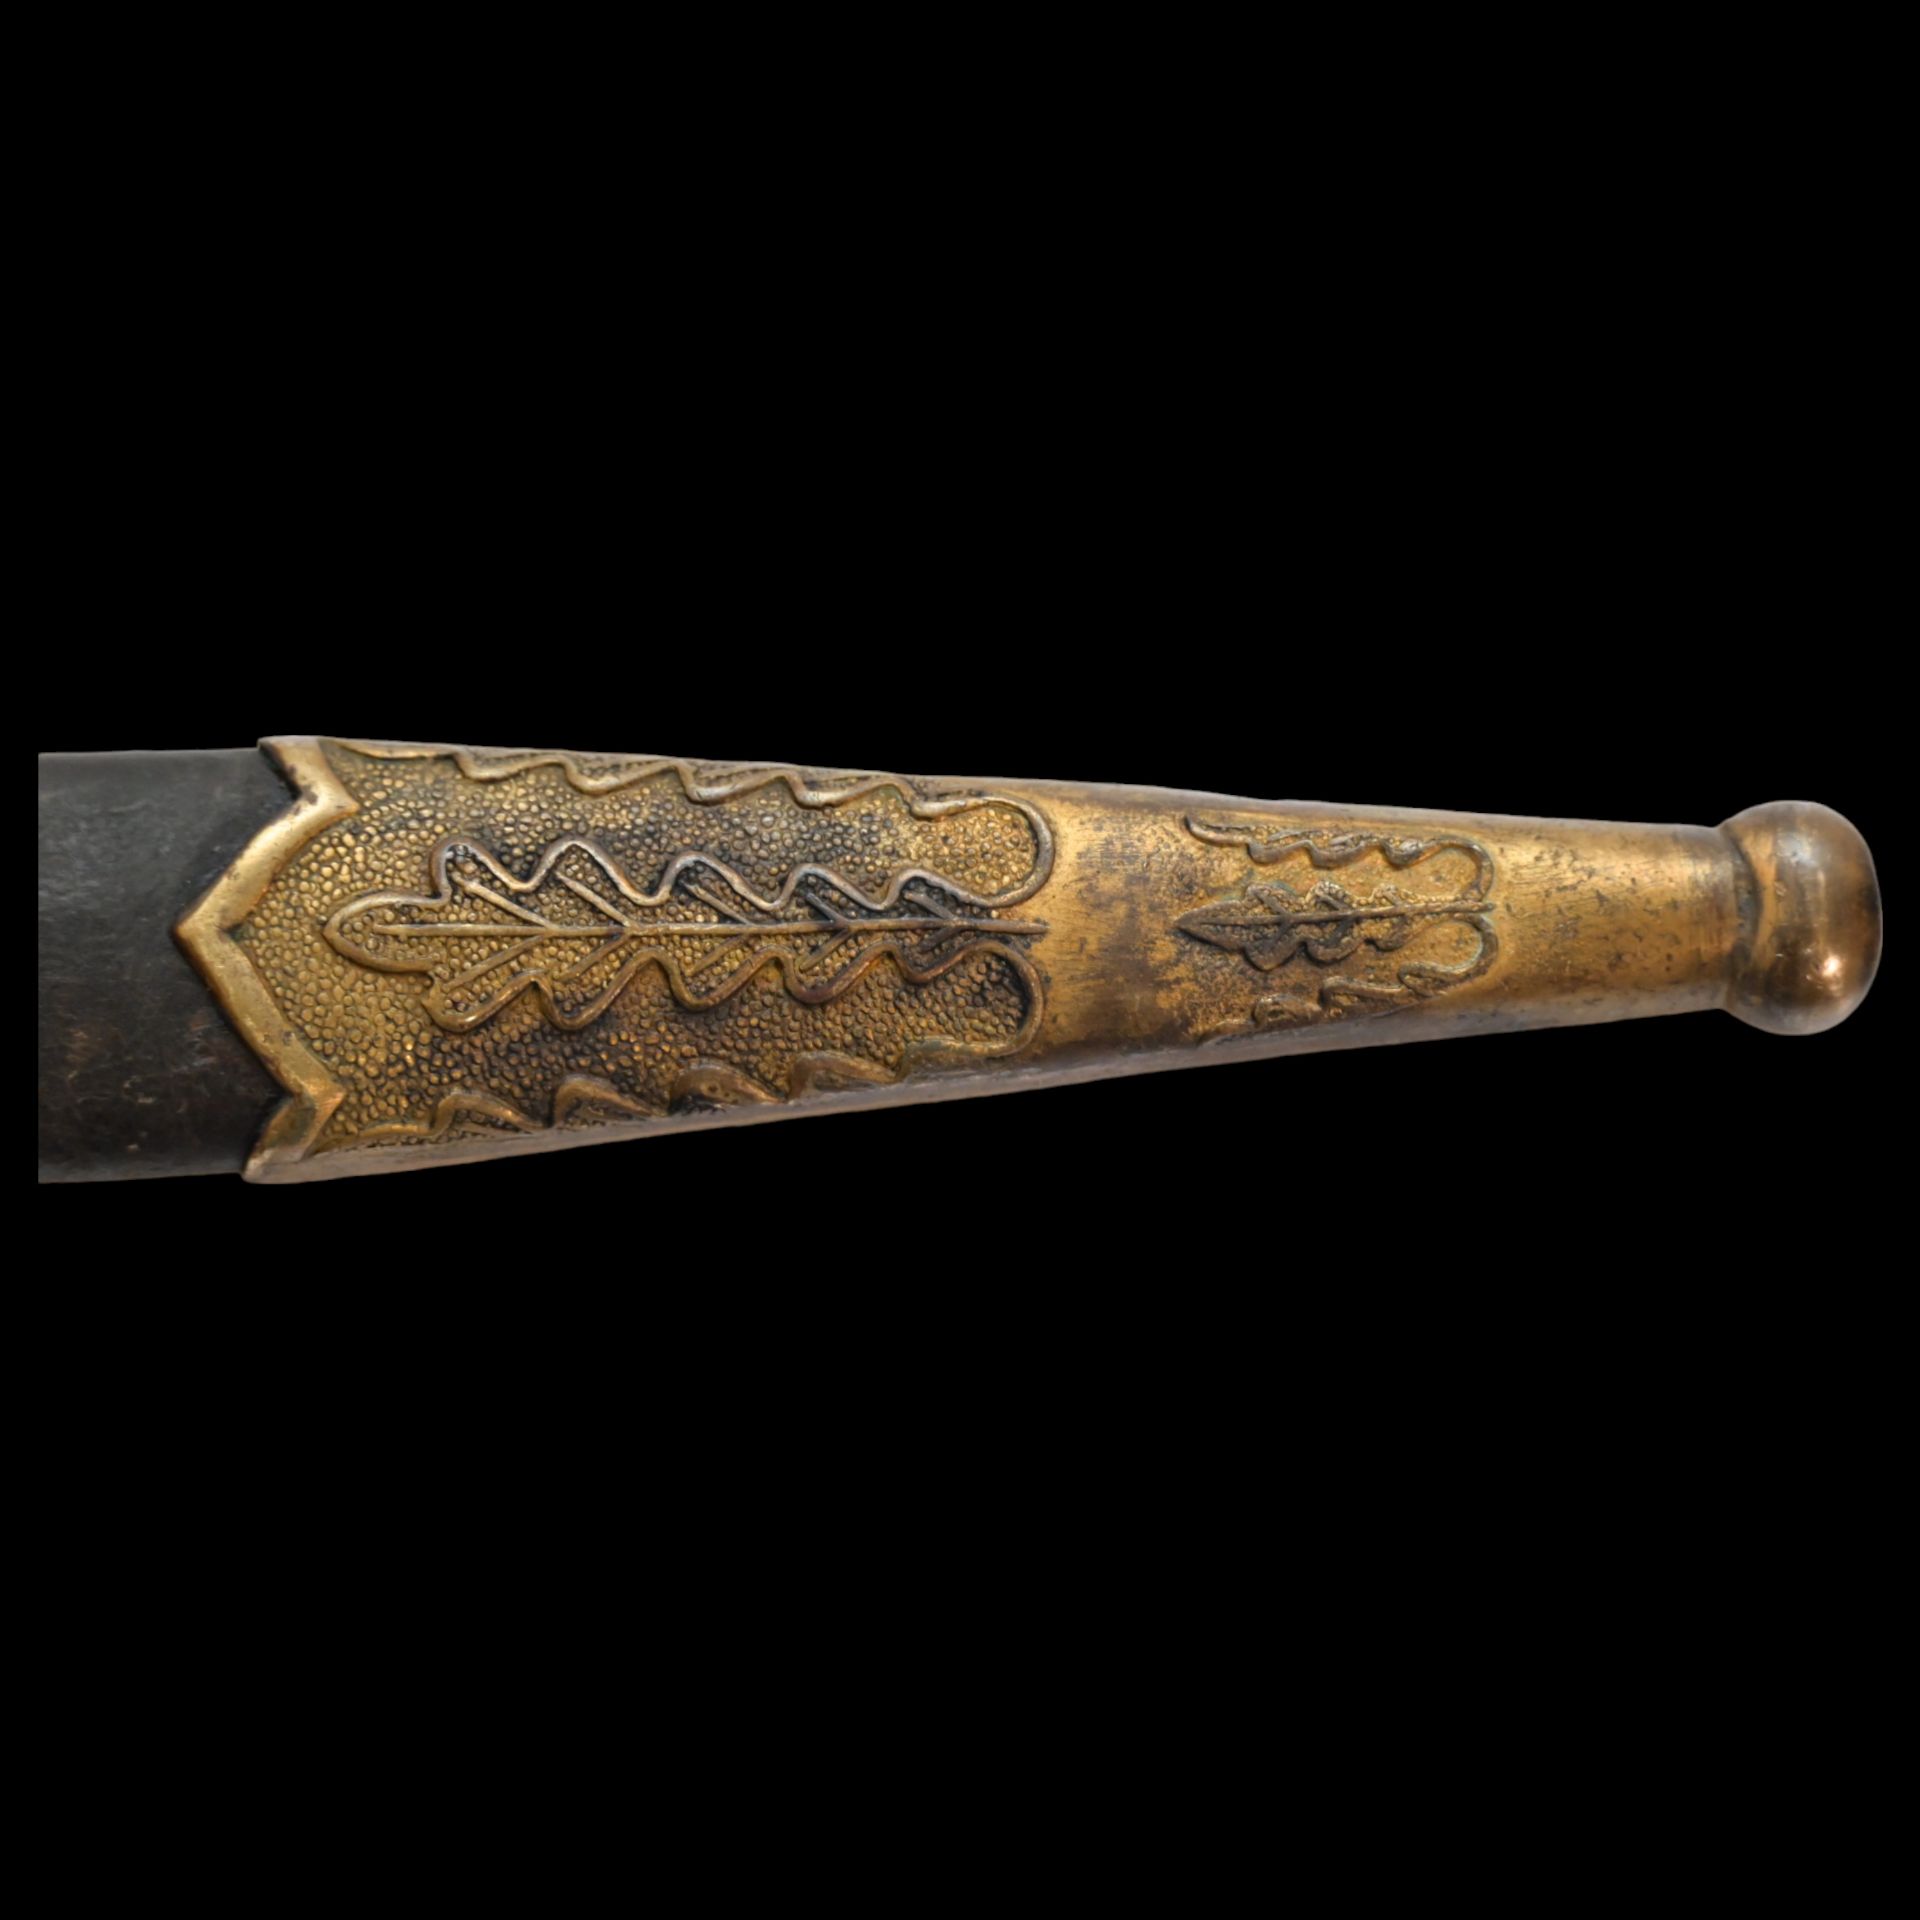 Knife of the class ranks of the Forester Corps, model 1898, Russian Empire, early 20th century. - Image 7 of 8